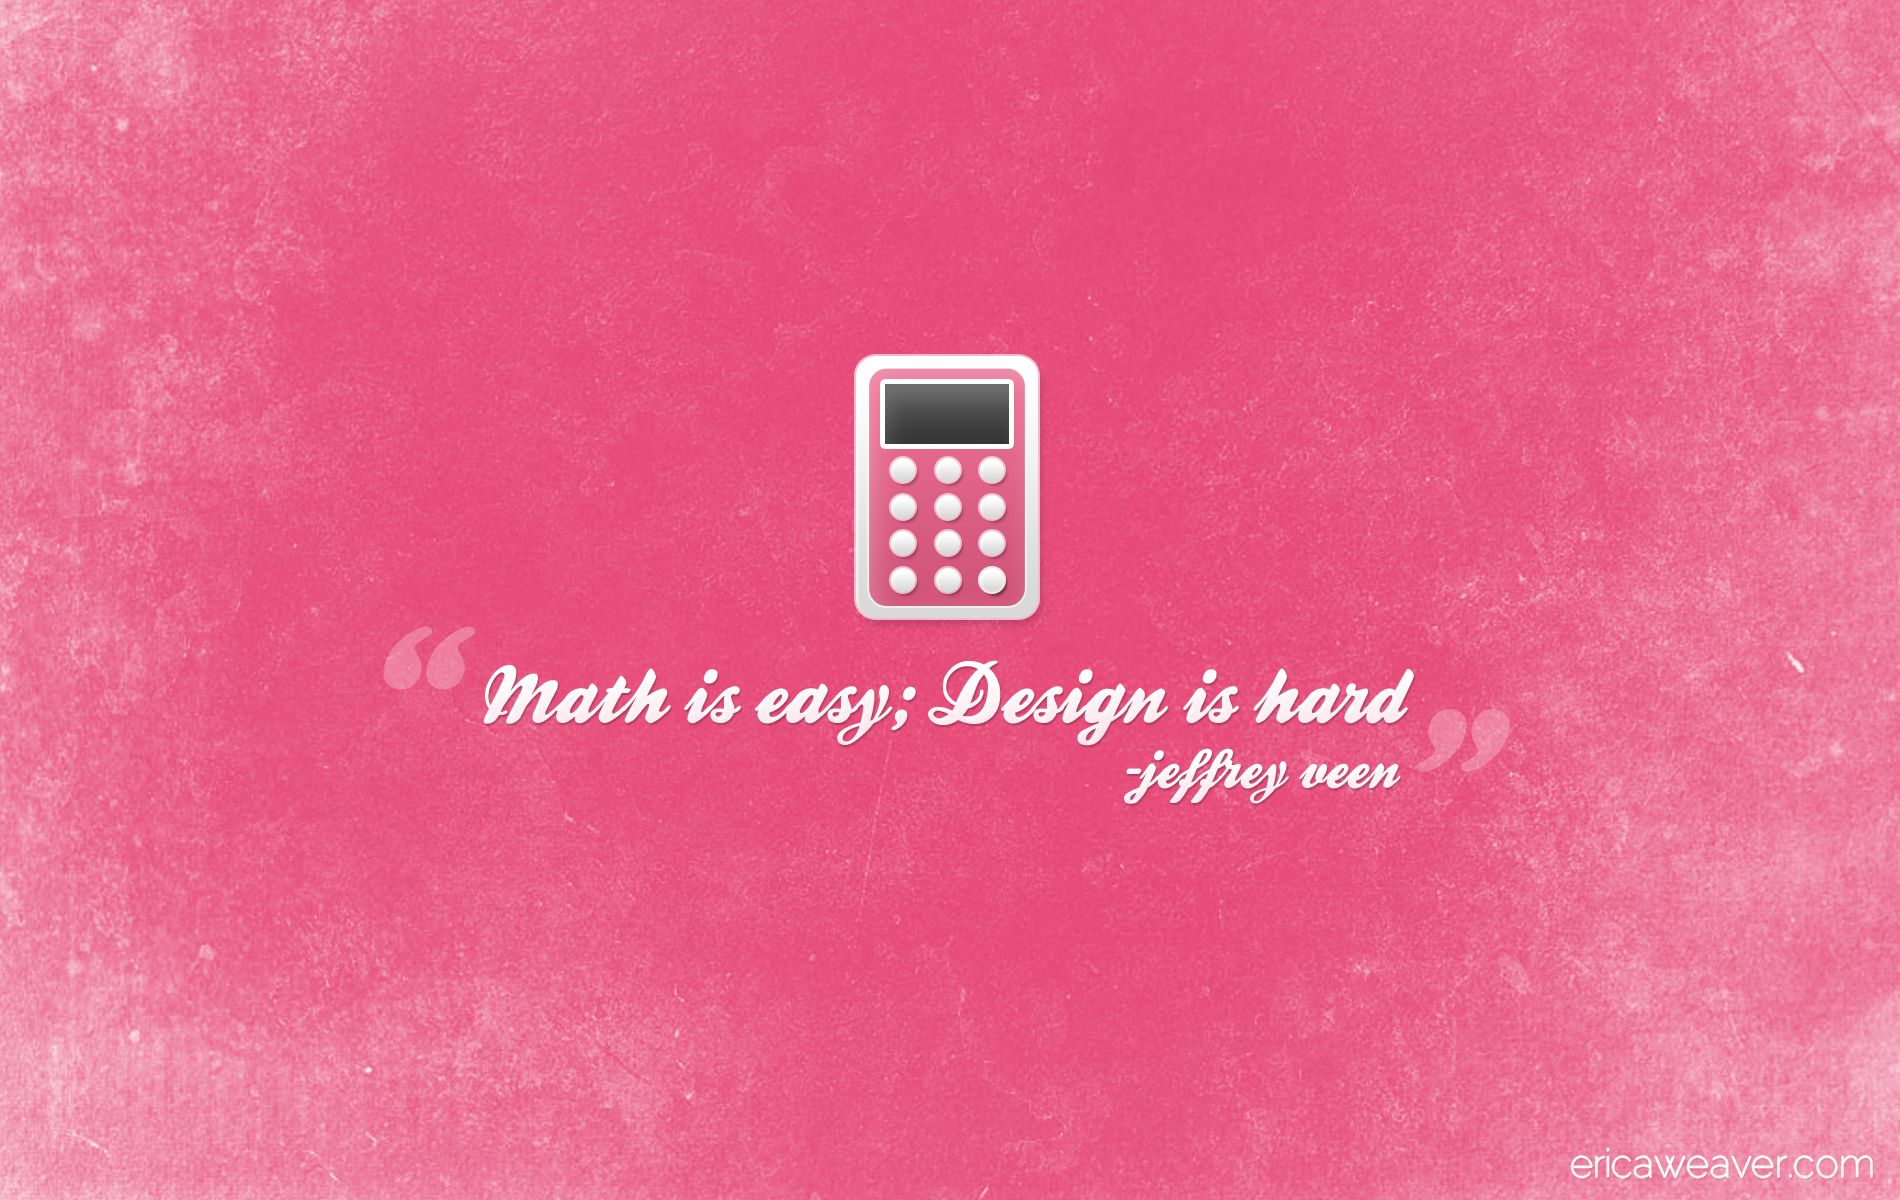 A calculator on a pink background with the quote 